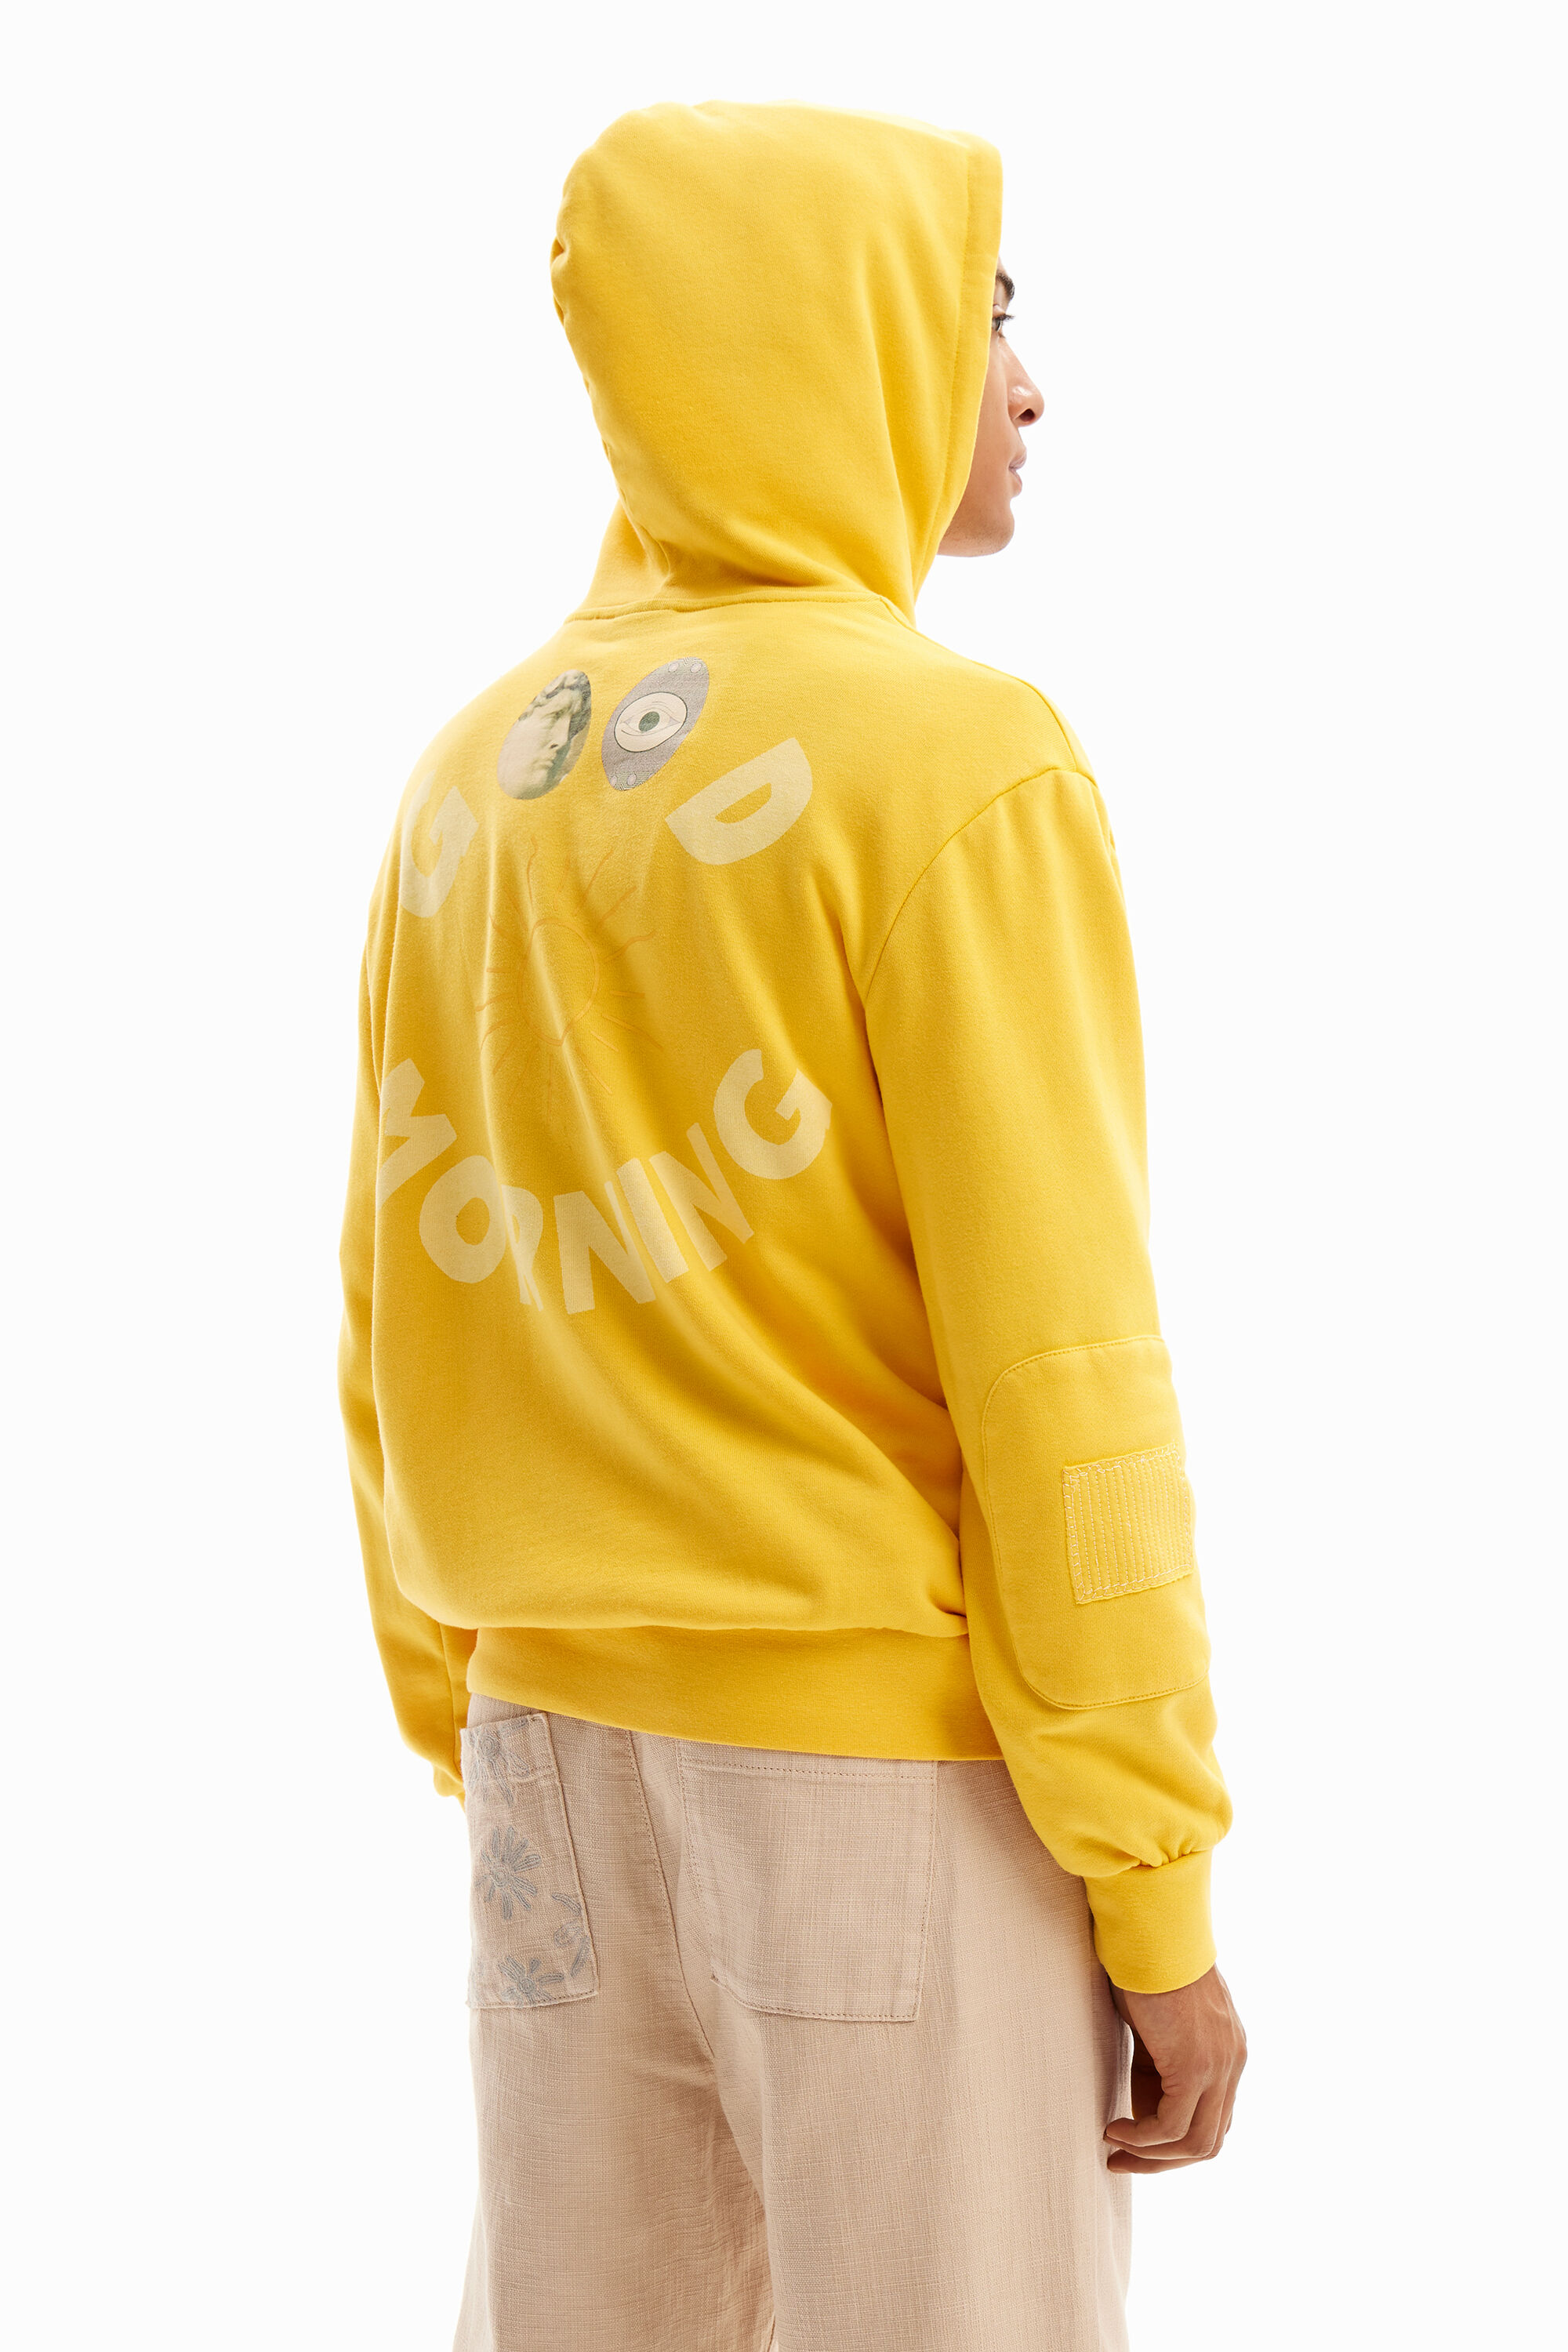 Patchwork message hoodie - YELLOW - L